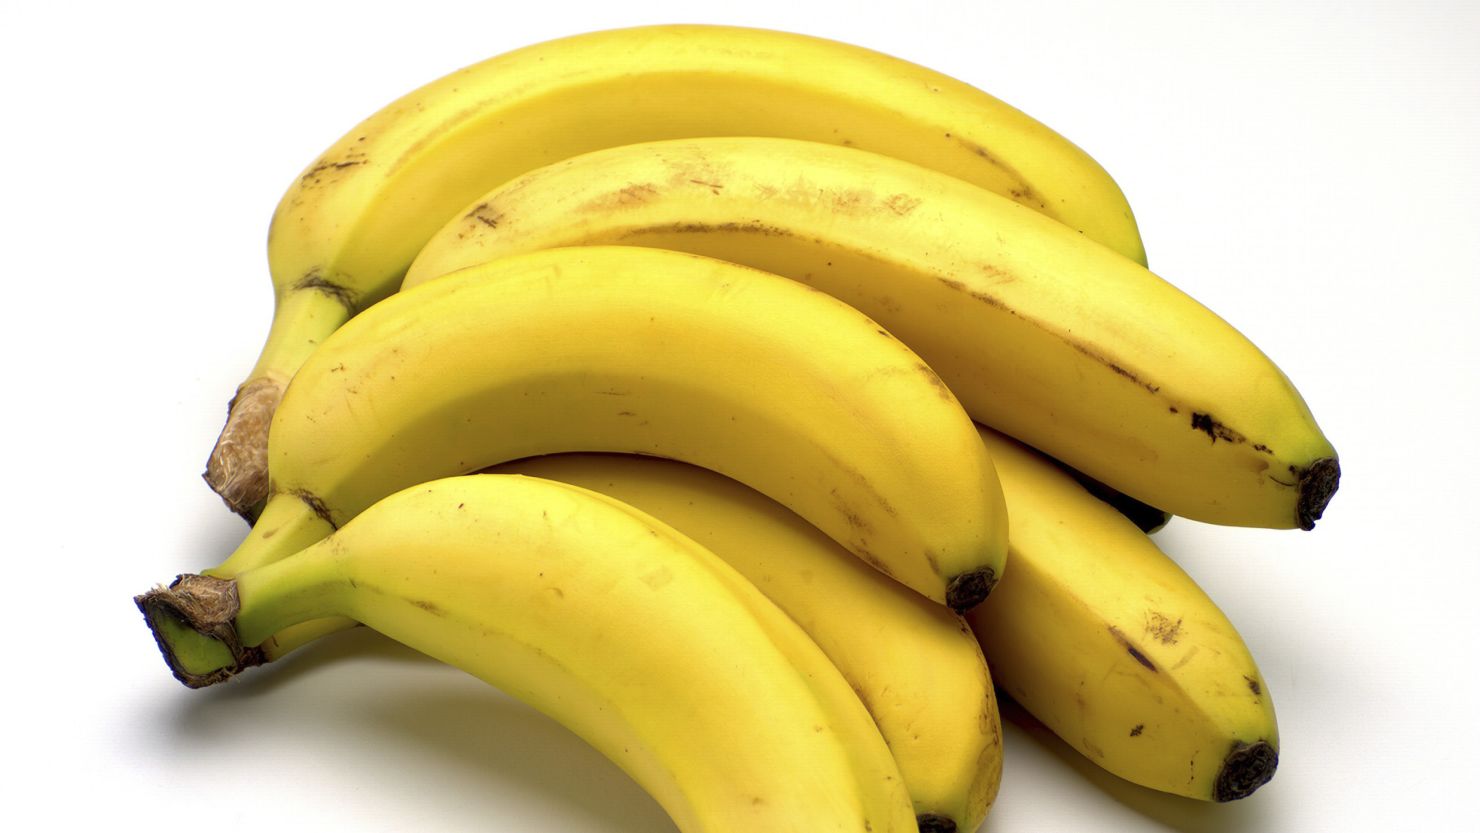 Unripe bananas are slightly better for you than ripe bananas, experts say. 